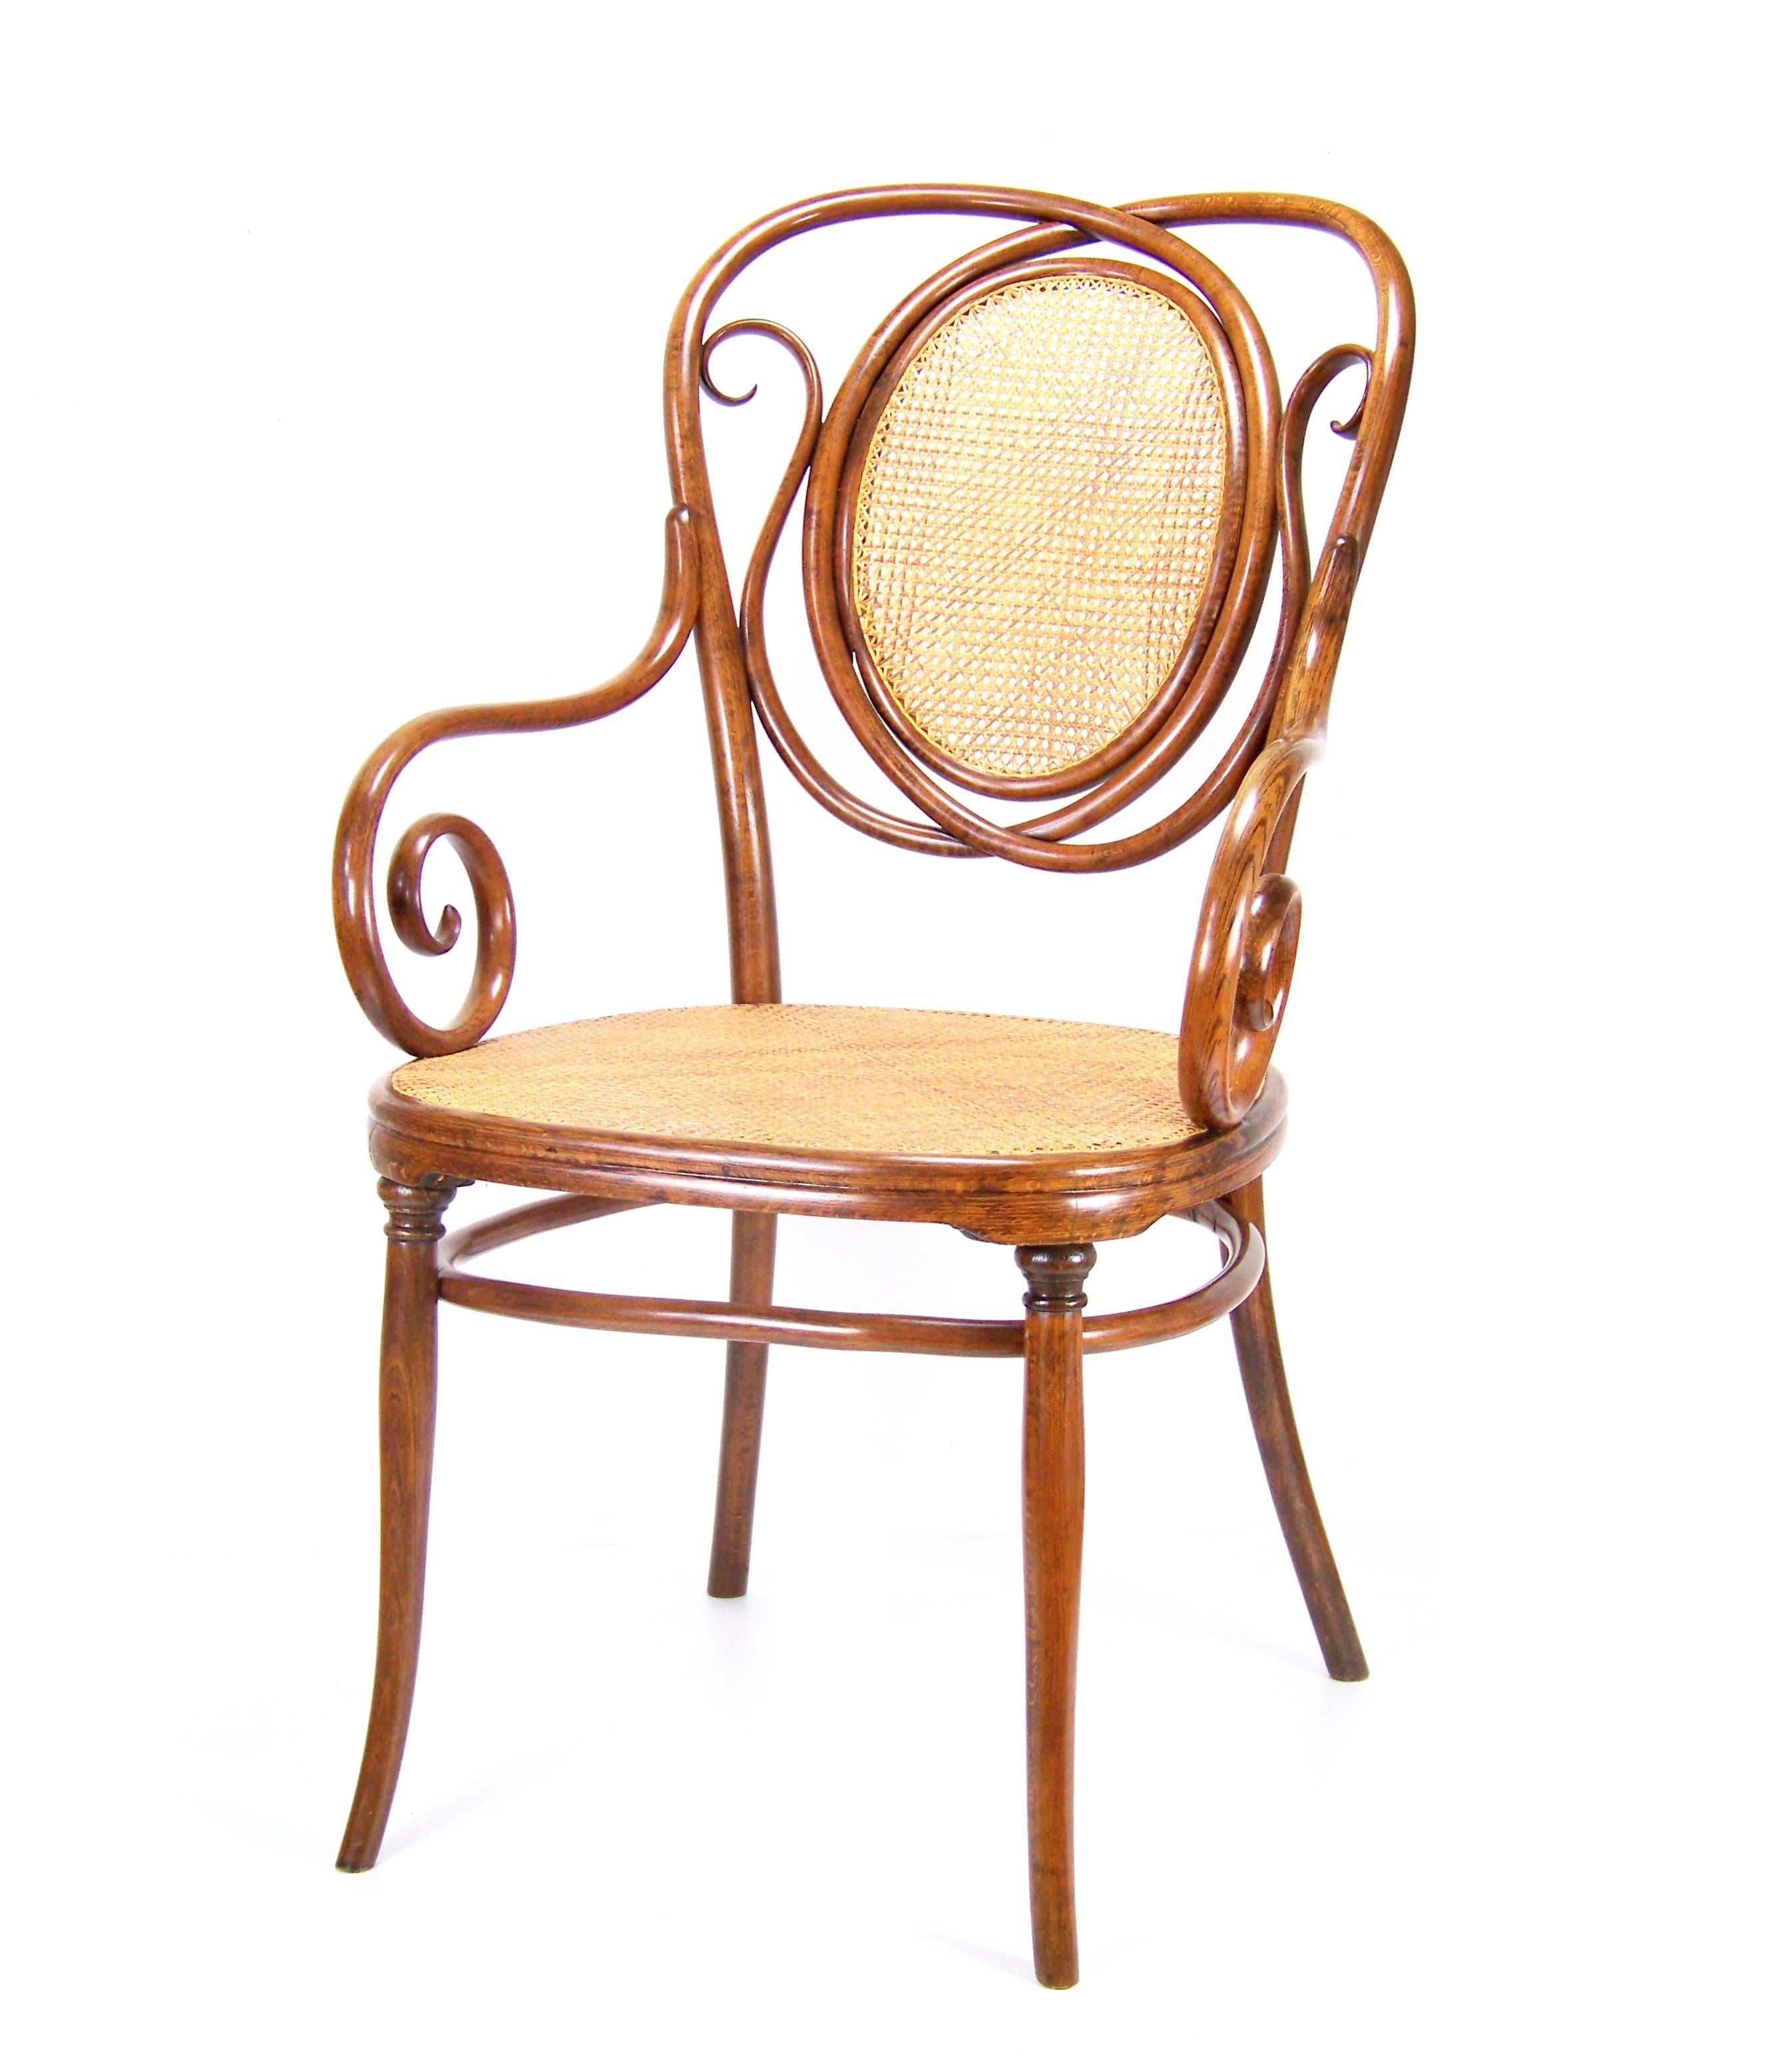 Rare Armchair Thonet Nr. 22, circa 1887-1910 In Good Condition For Sale In Praha, CZ